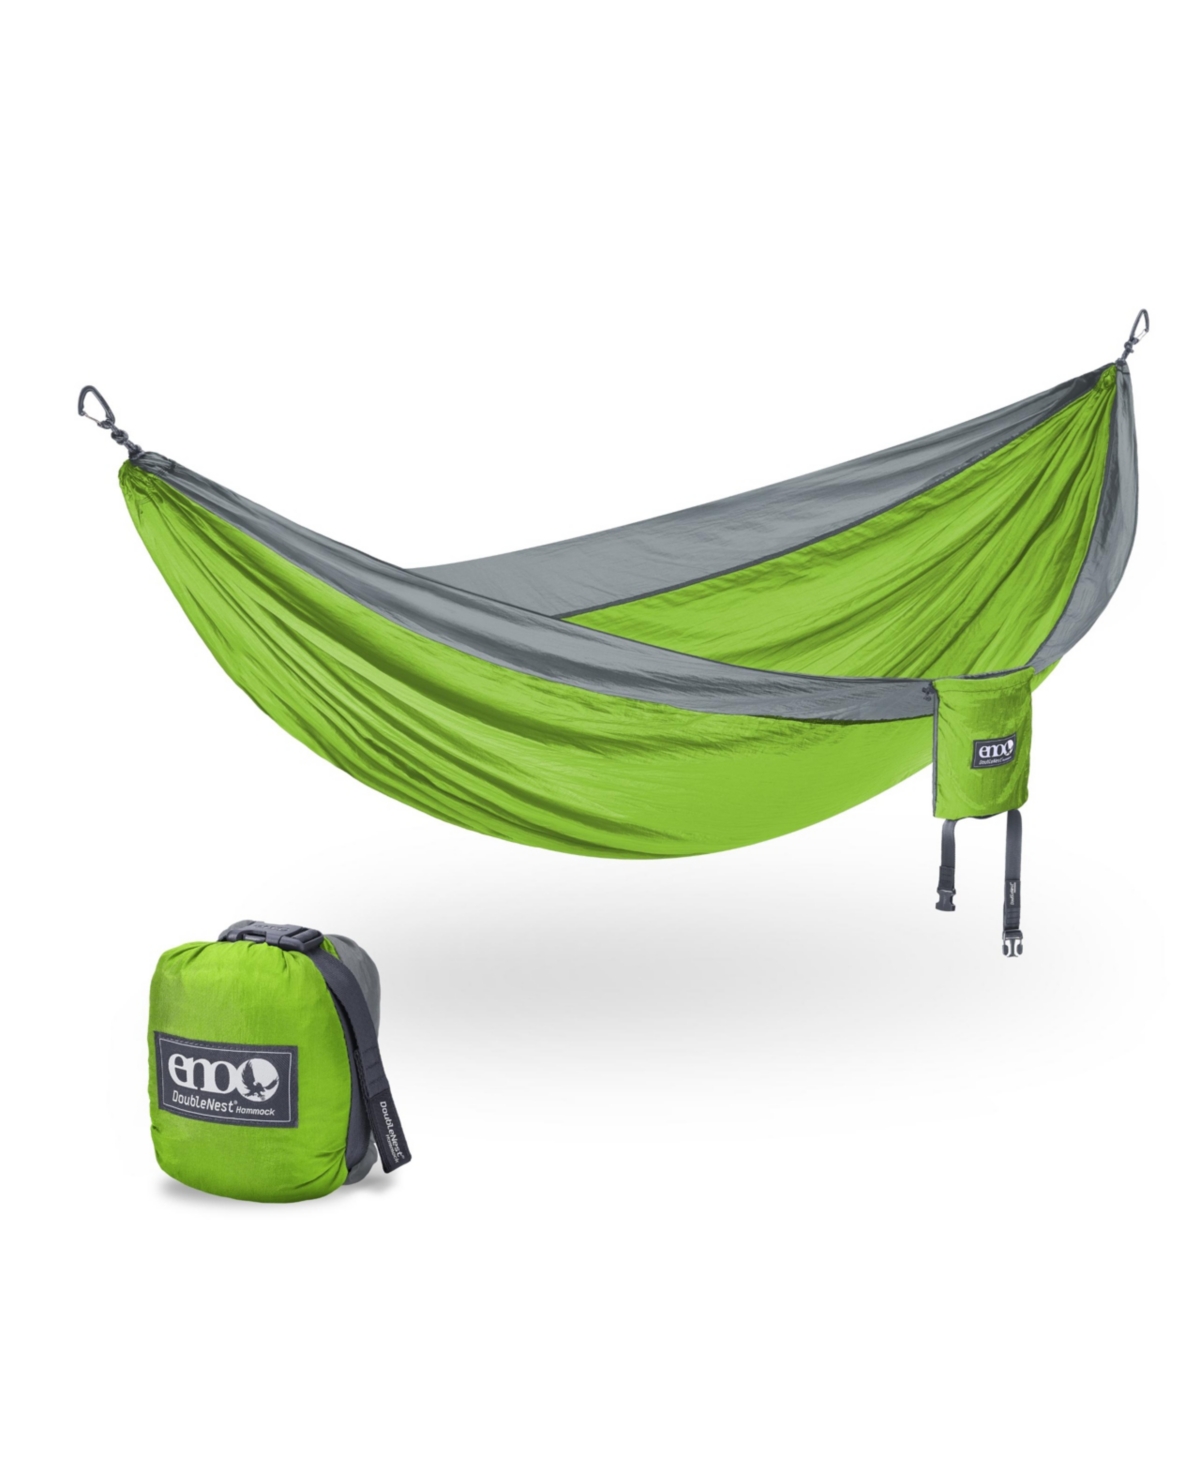 DoubleNest Hammock - Lightweight, Portable, 1 to 2 Person Hammock - For Camping, Hiking, Backpacking, Travel, a Festival, or the Beach - Chartreus